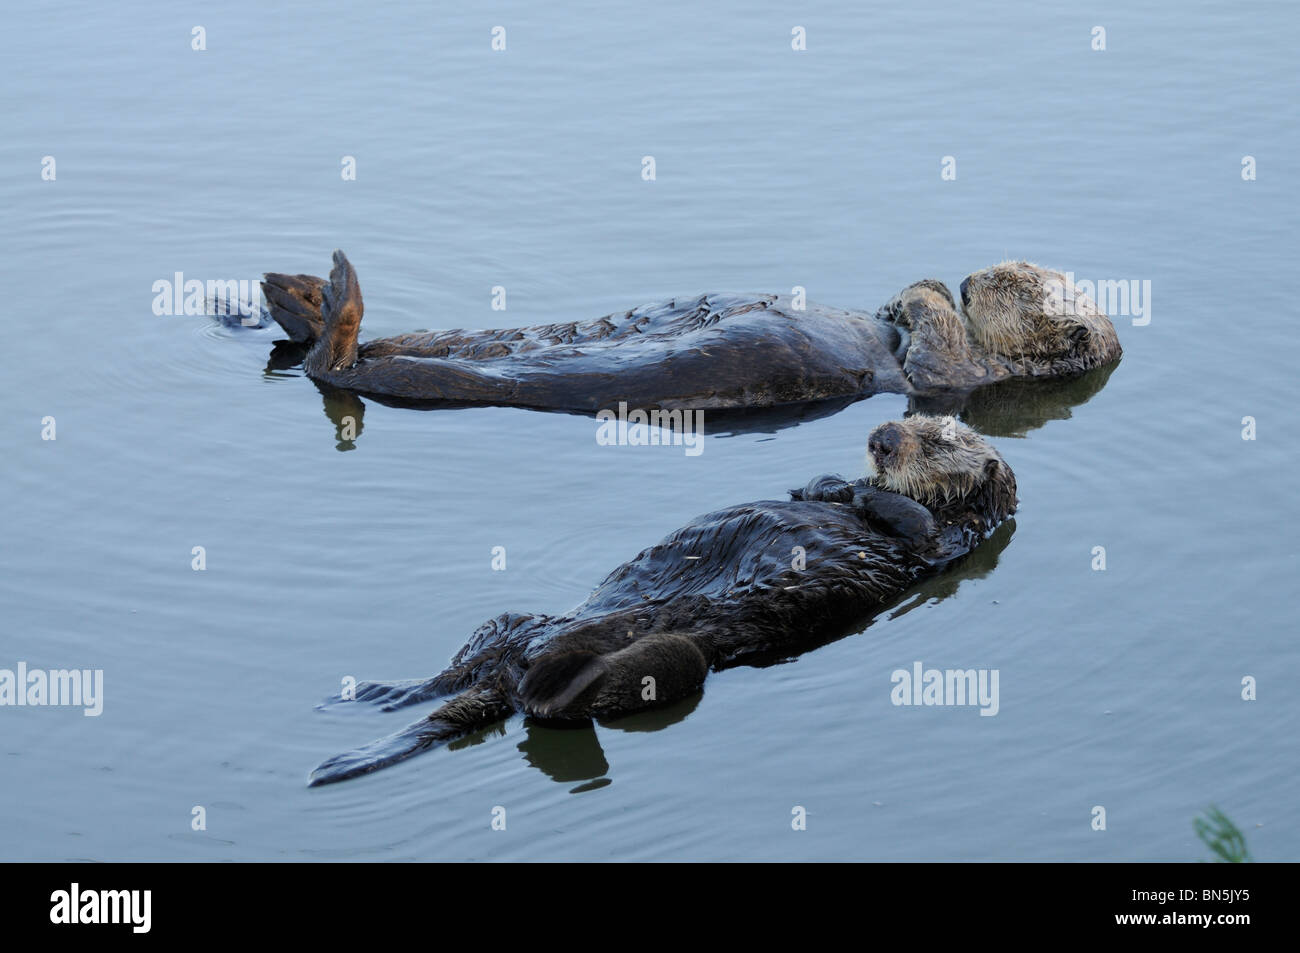 Stock photo of a pair of breeding California sea otters floating together on their backs. Stock Photo